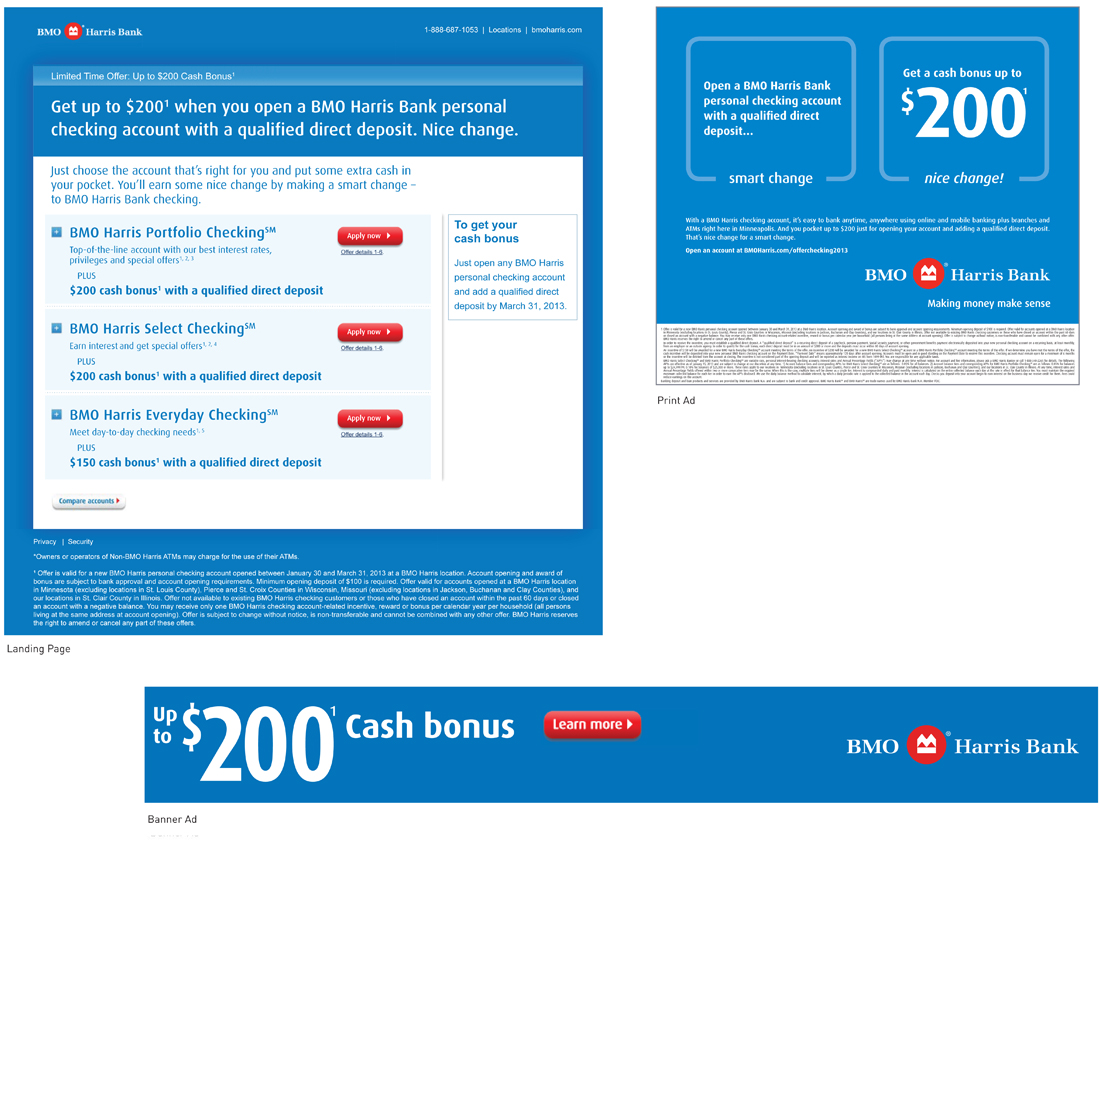 BMO Harris Bank print ad, banner ad, and landing page featuring a $200 cash bonus for new checking accounts